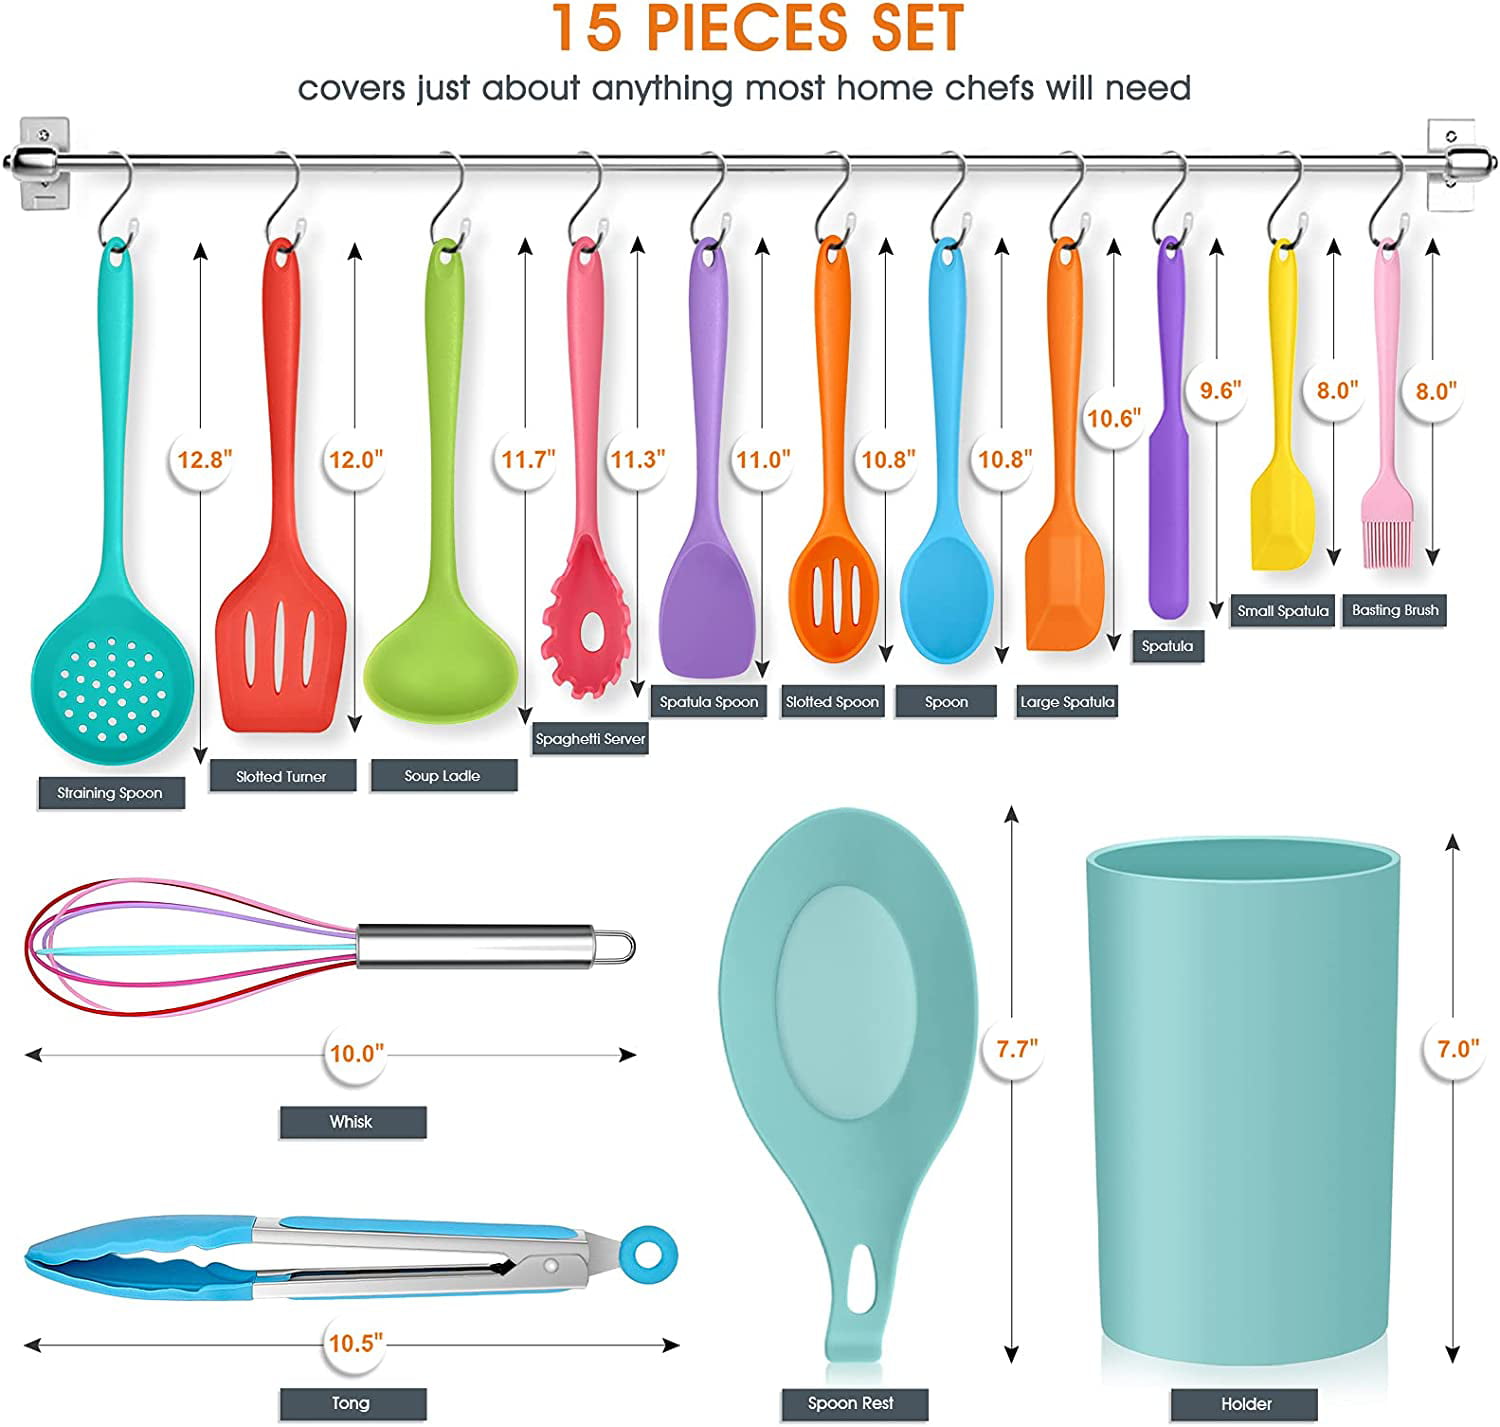 COOKLOVER Non-Stick Cookware 15-PC Set w/ Cooking Utensil Pack